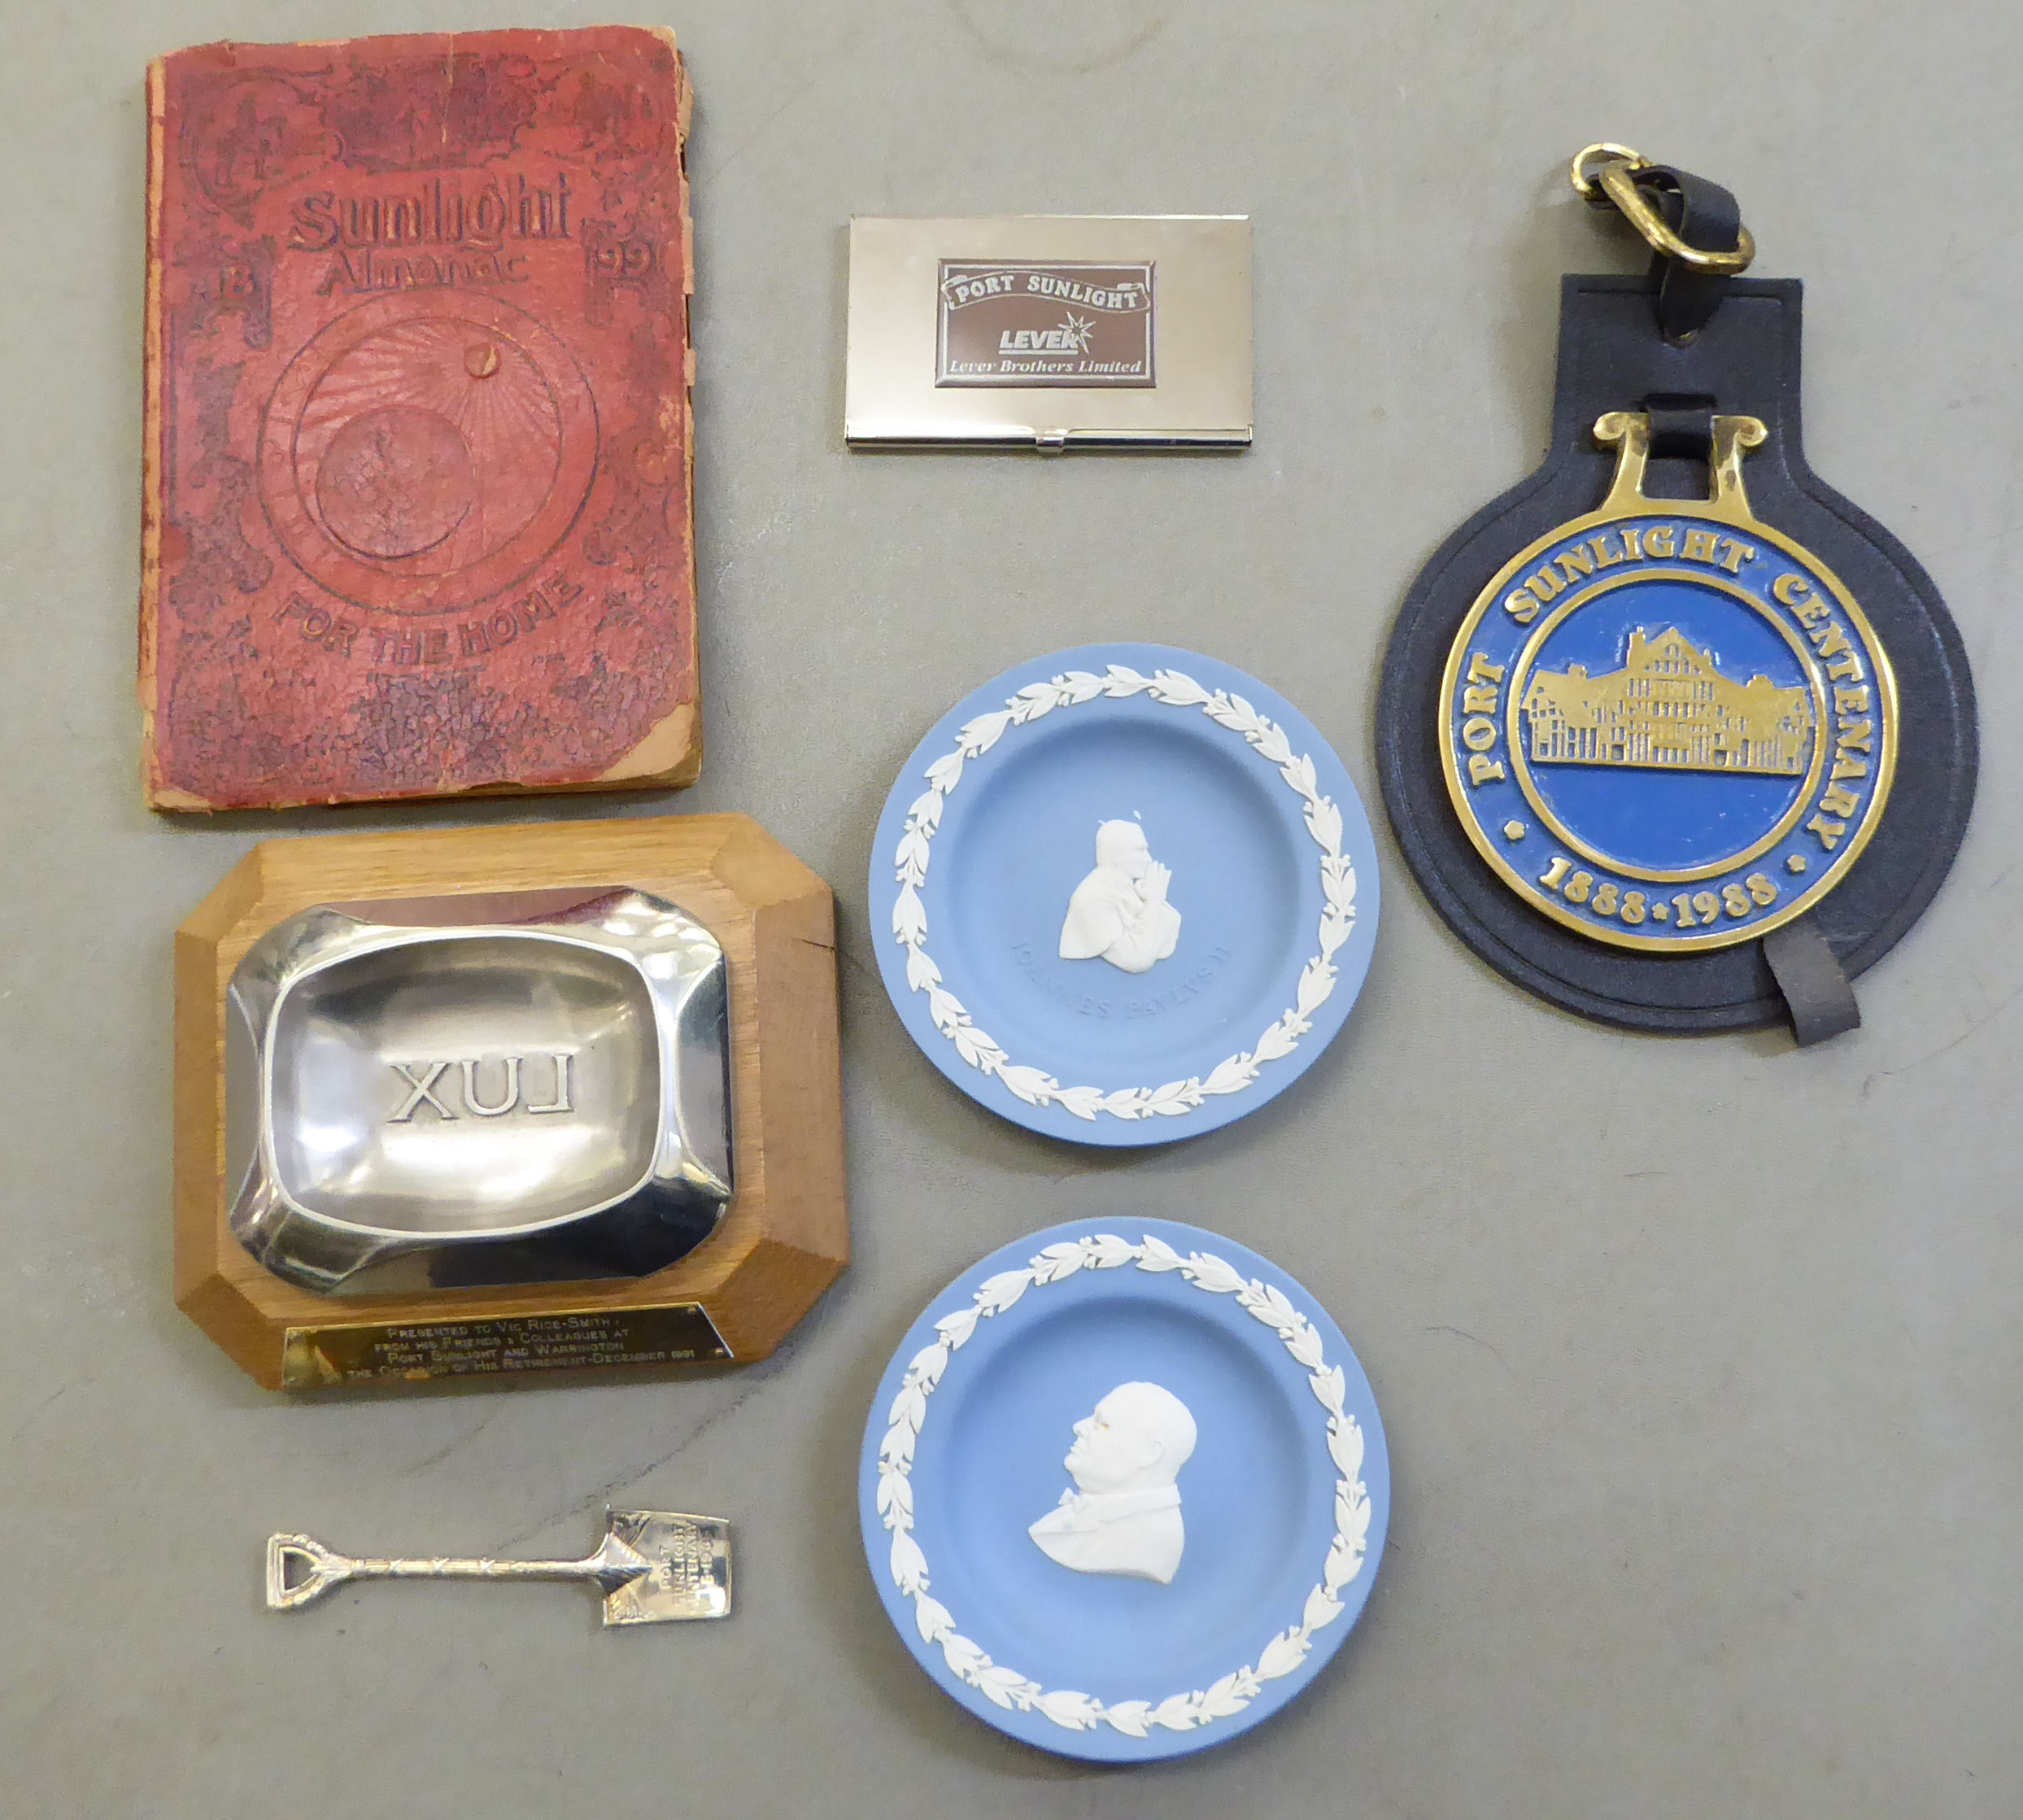 Promotional items, pertaining to Port Sunlight: to include a centennial brass badge; and An Almanack - Image 2 of 5